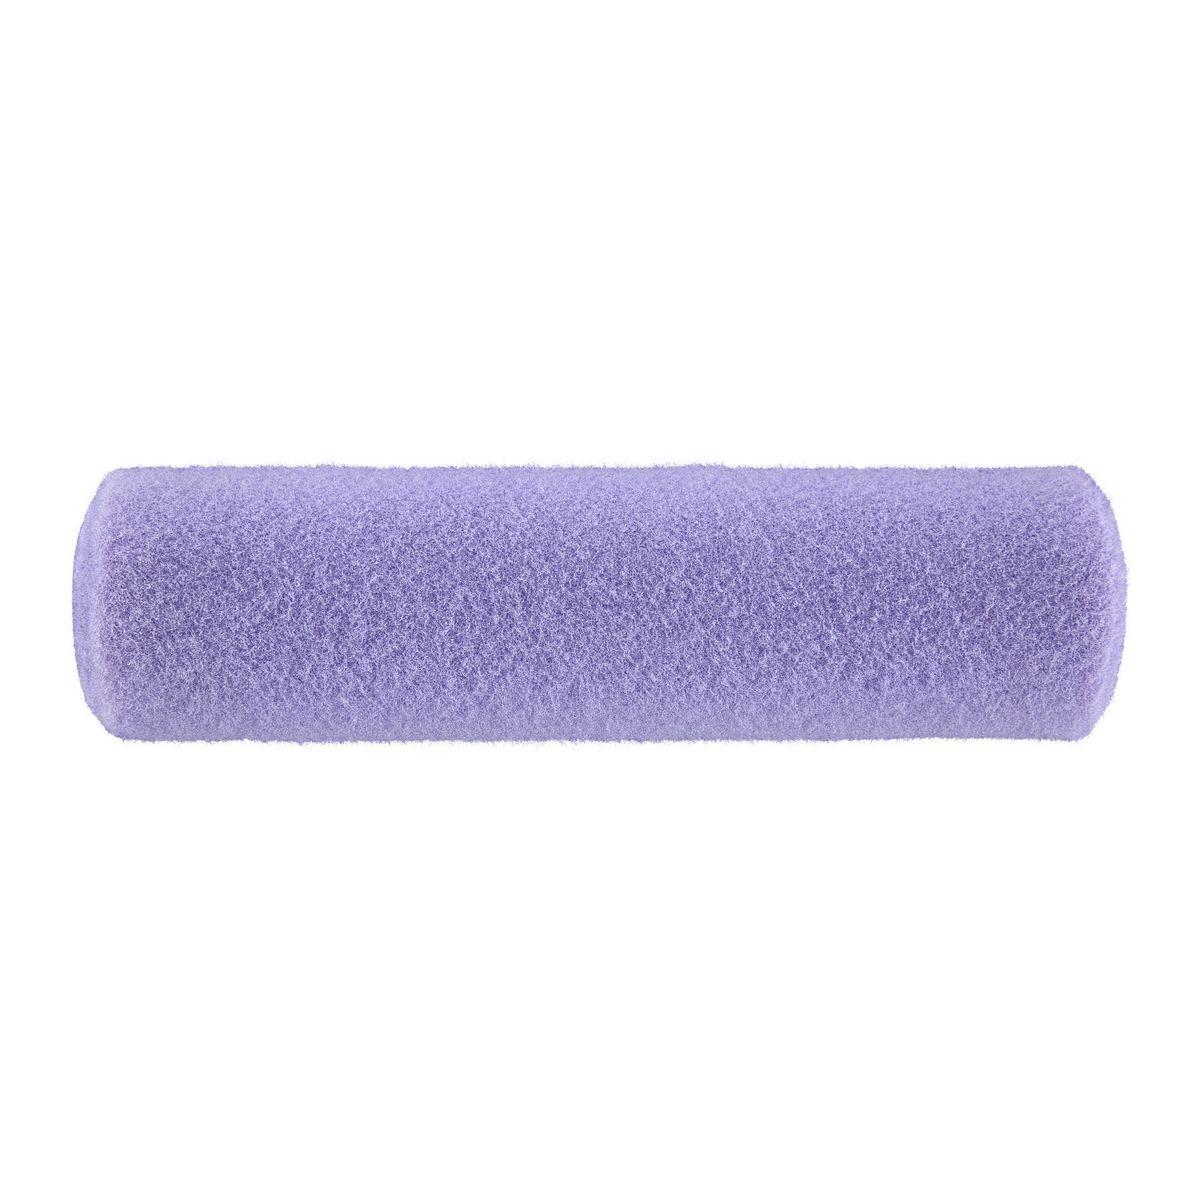 WOOSTER 9 in. Paint Roller Cover with 3/4 in. Nap - BETTER Quality